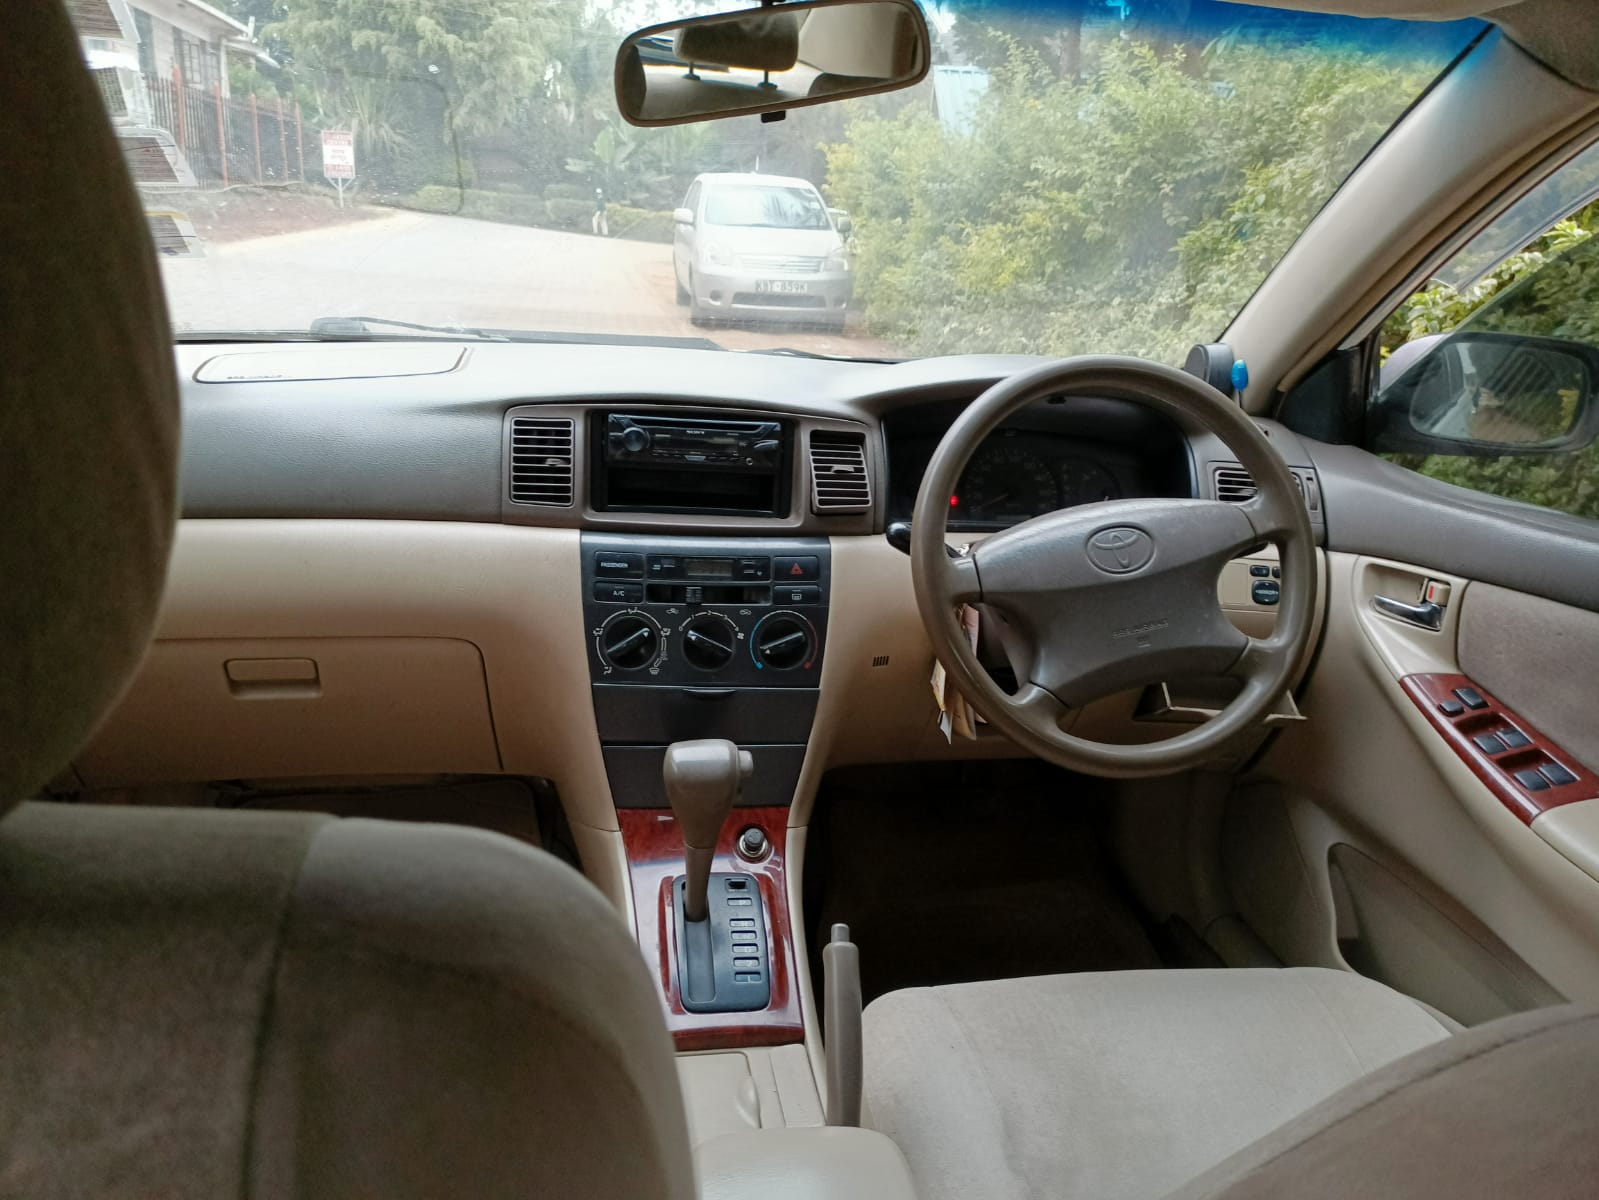 Toyota Corolla NZE 2003 Pay 20% deposit Hottest offer